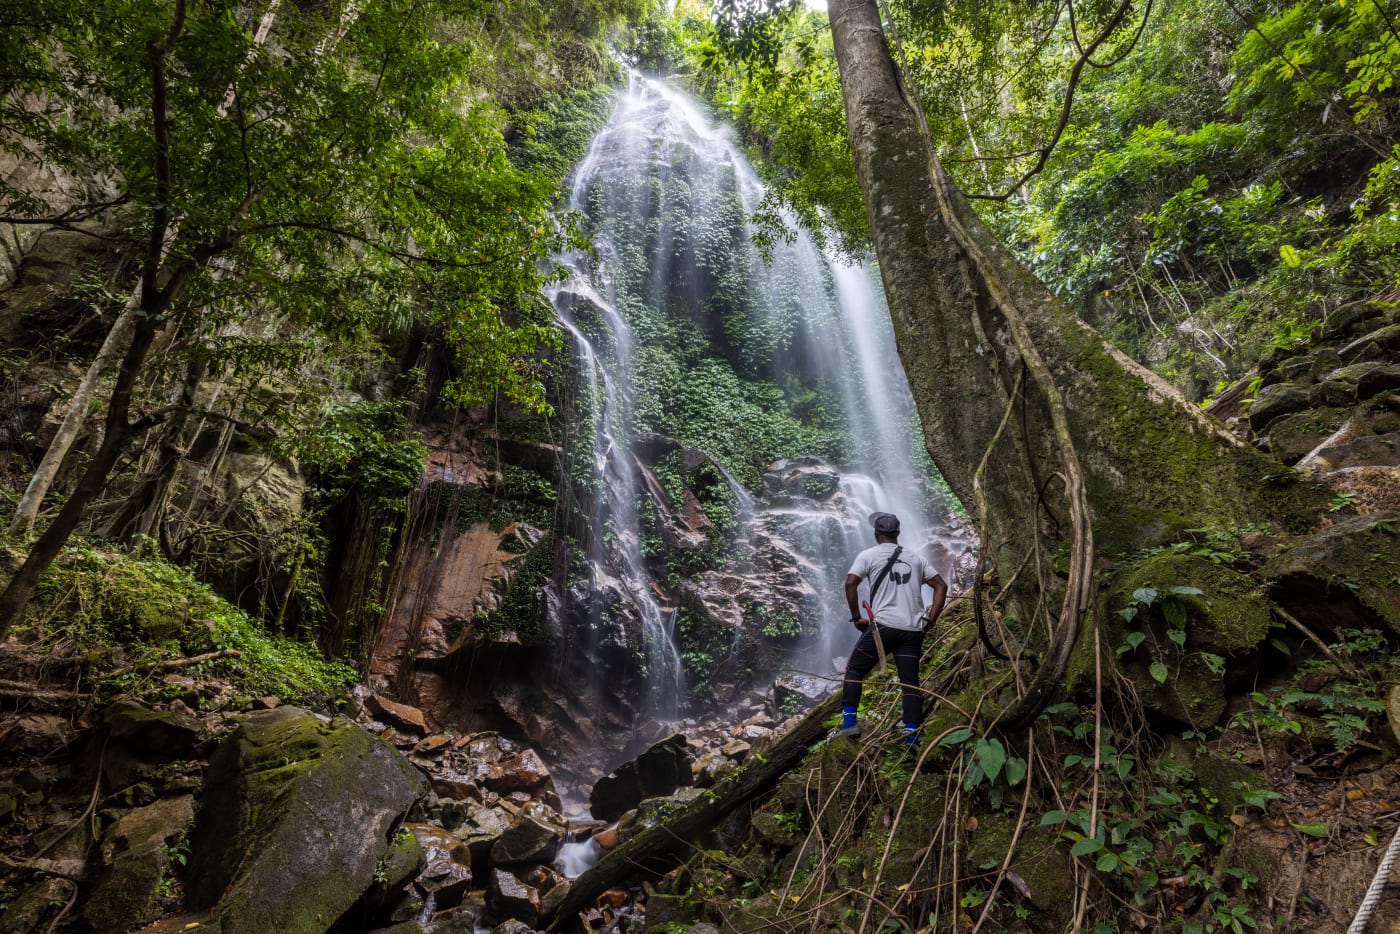 Merapi Mat Razi, Senior anti-poaching patrol member at WWF–Malaysia, stands in front of the Kooi Waterfall in Royal Belum State Park, an important site for WWF-Malaysia’s tiger conservation work.